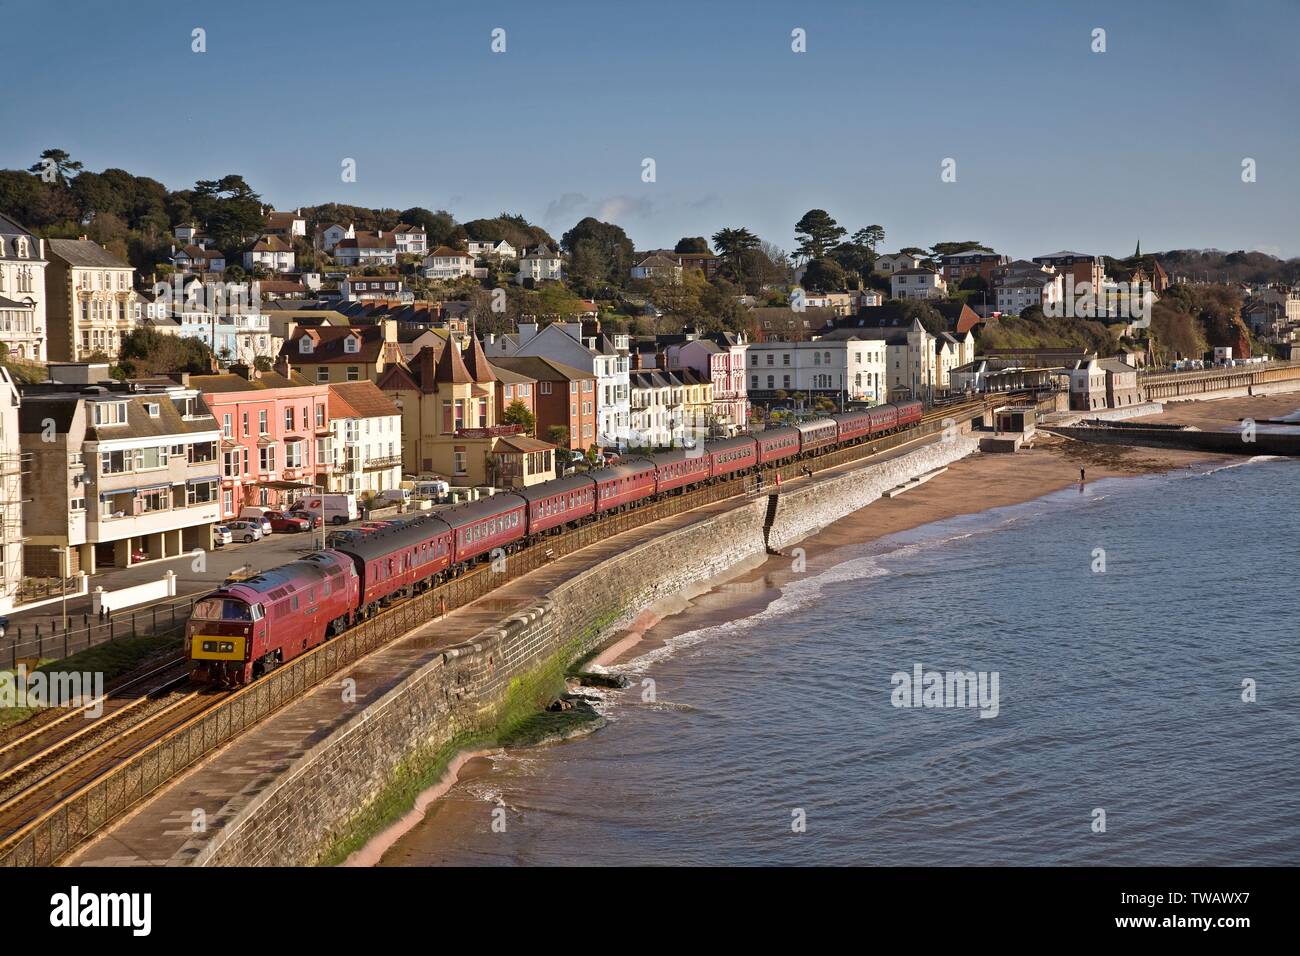 Great Britain, England, Western D1015 Western Champion passing Dawlish with a Bris. Stock Photo